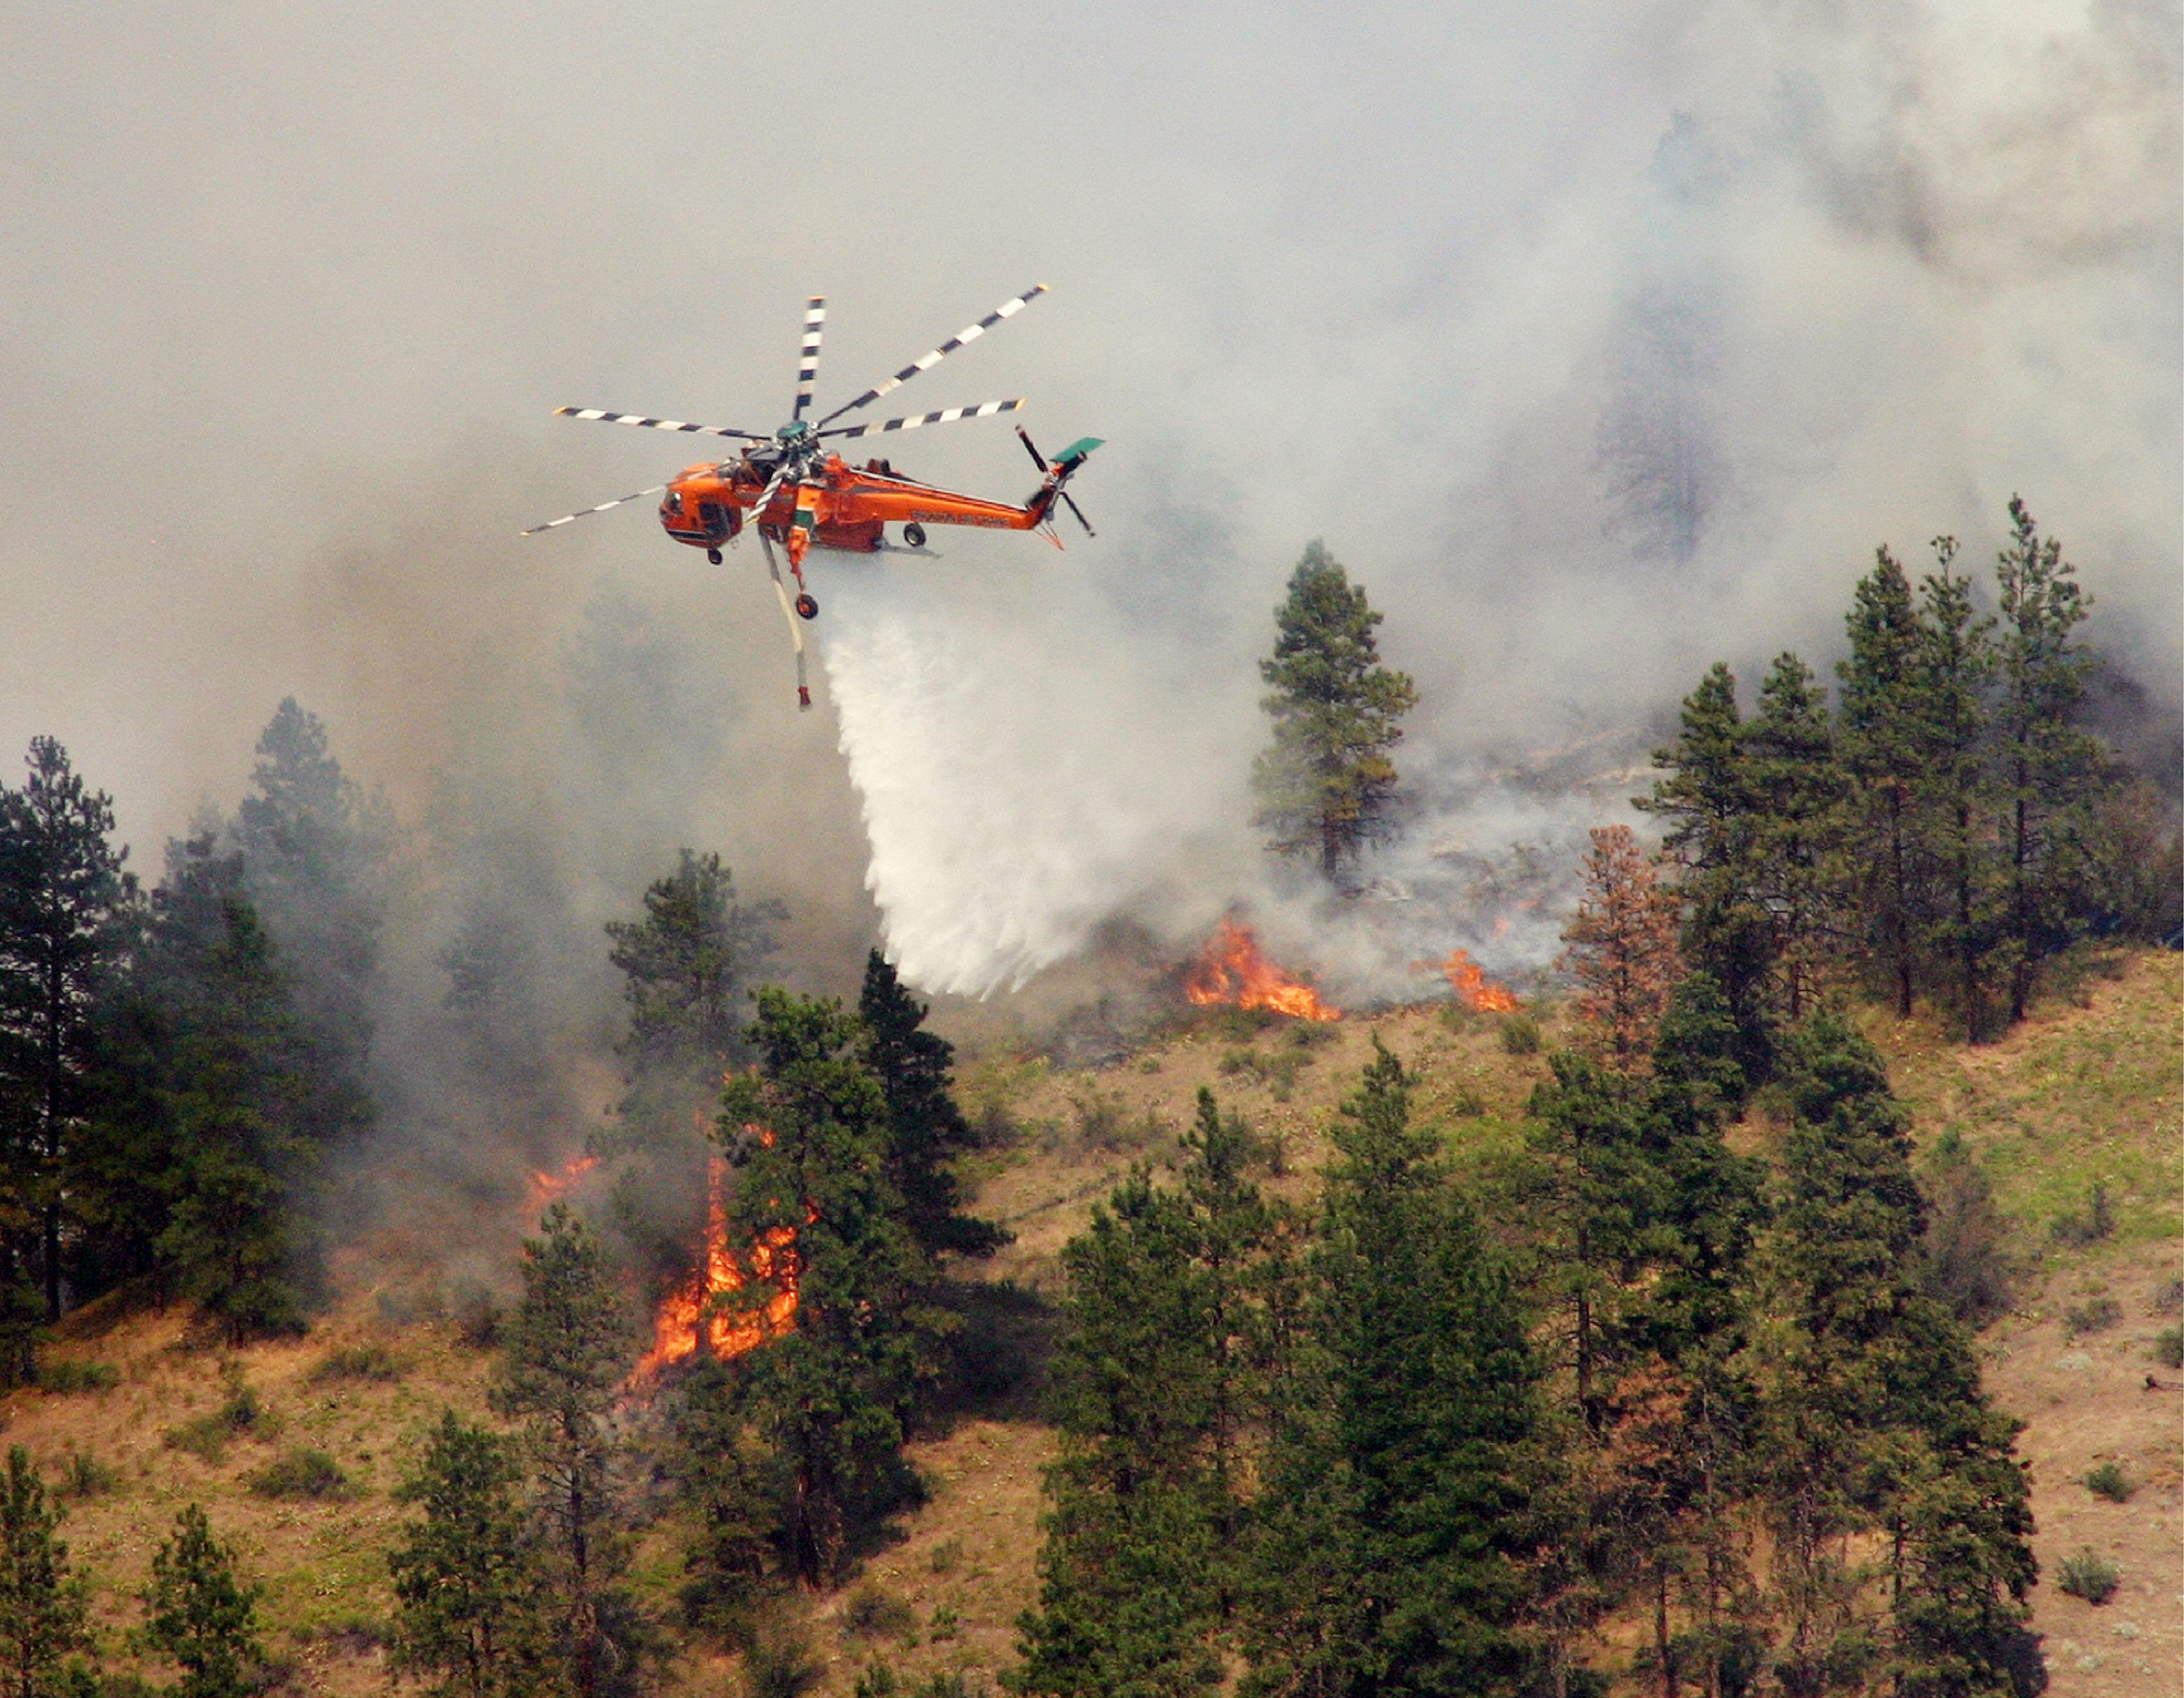 An Erickson Air-Crane, Inc. Sikorsky S-64 Skycrane drops water on a forest fire. (Sikorsky Archives)